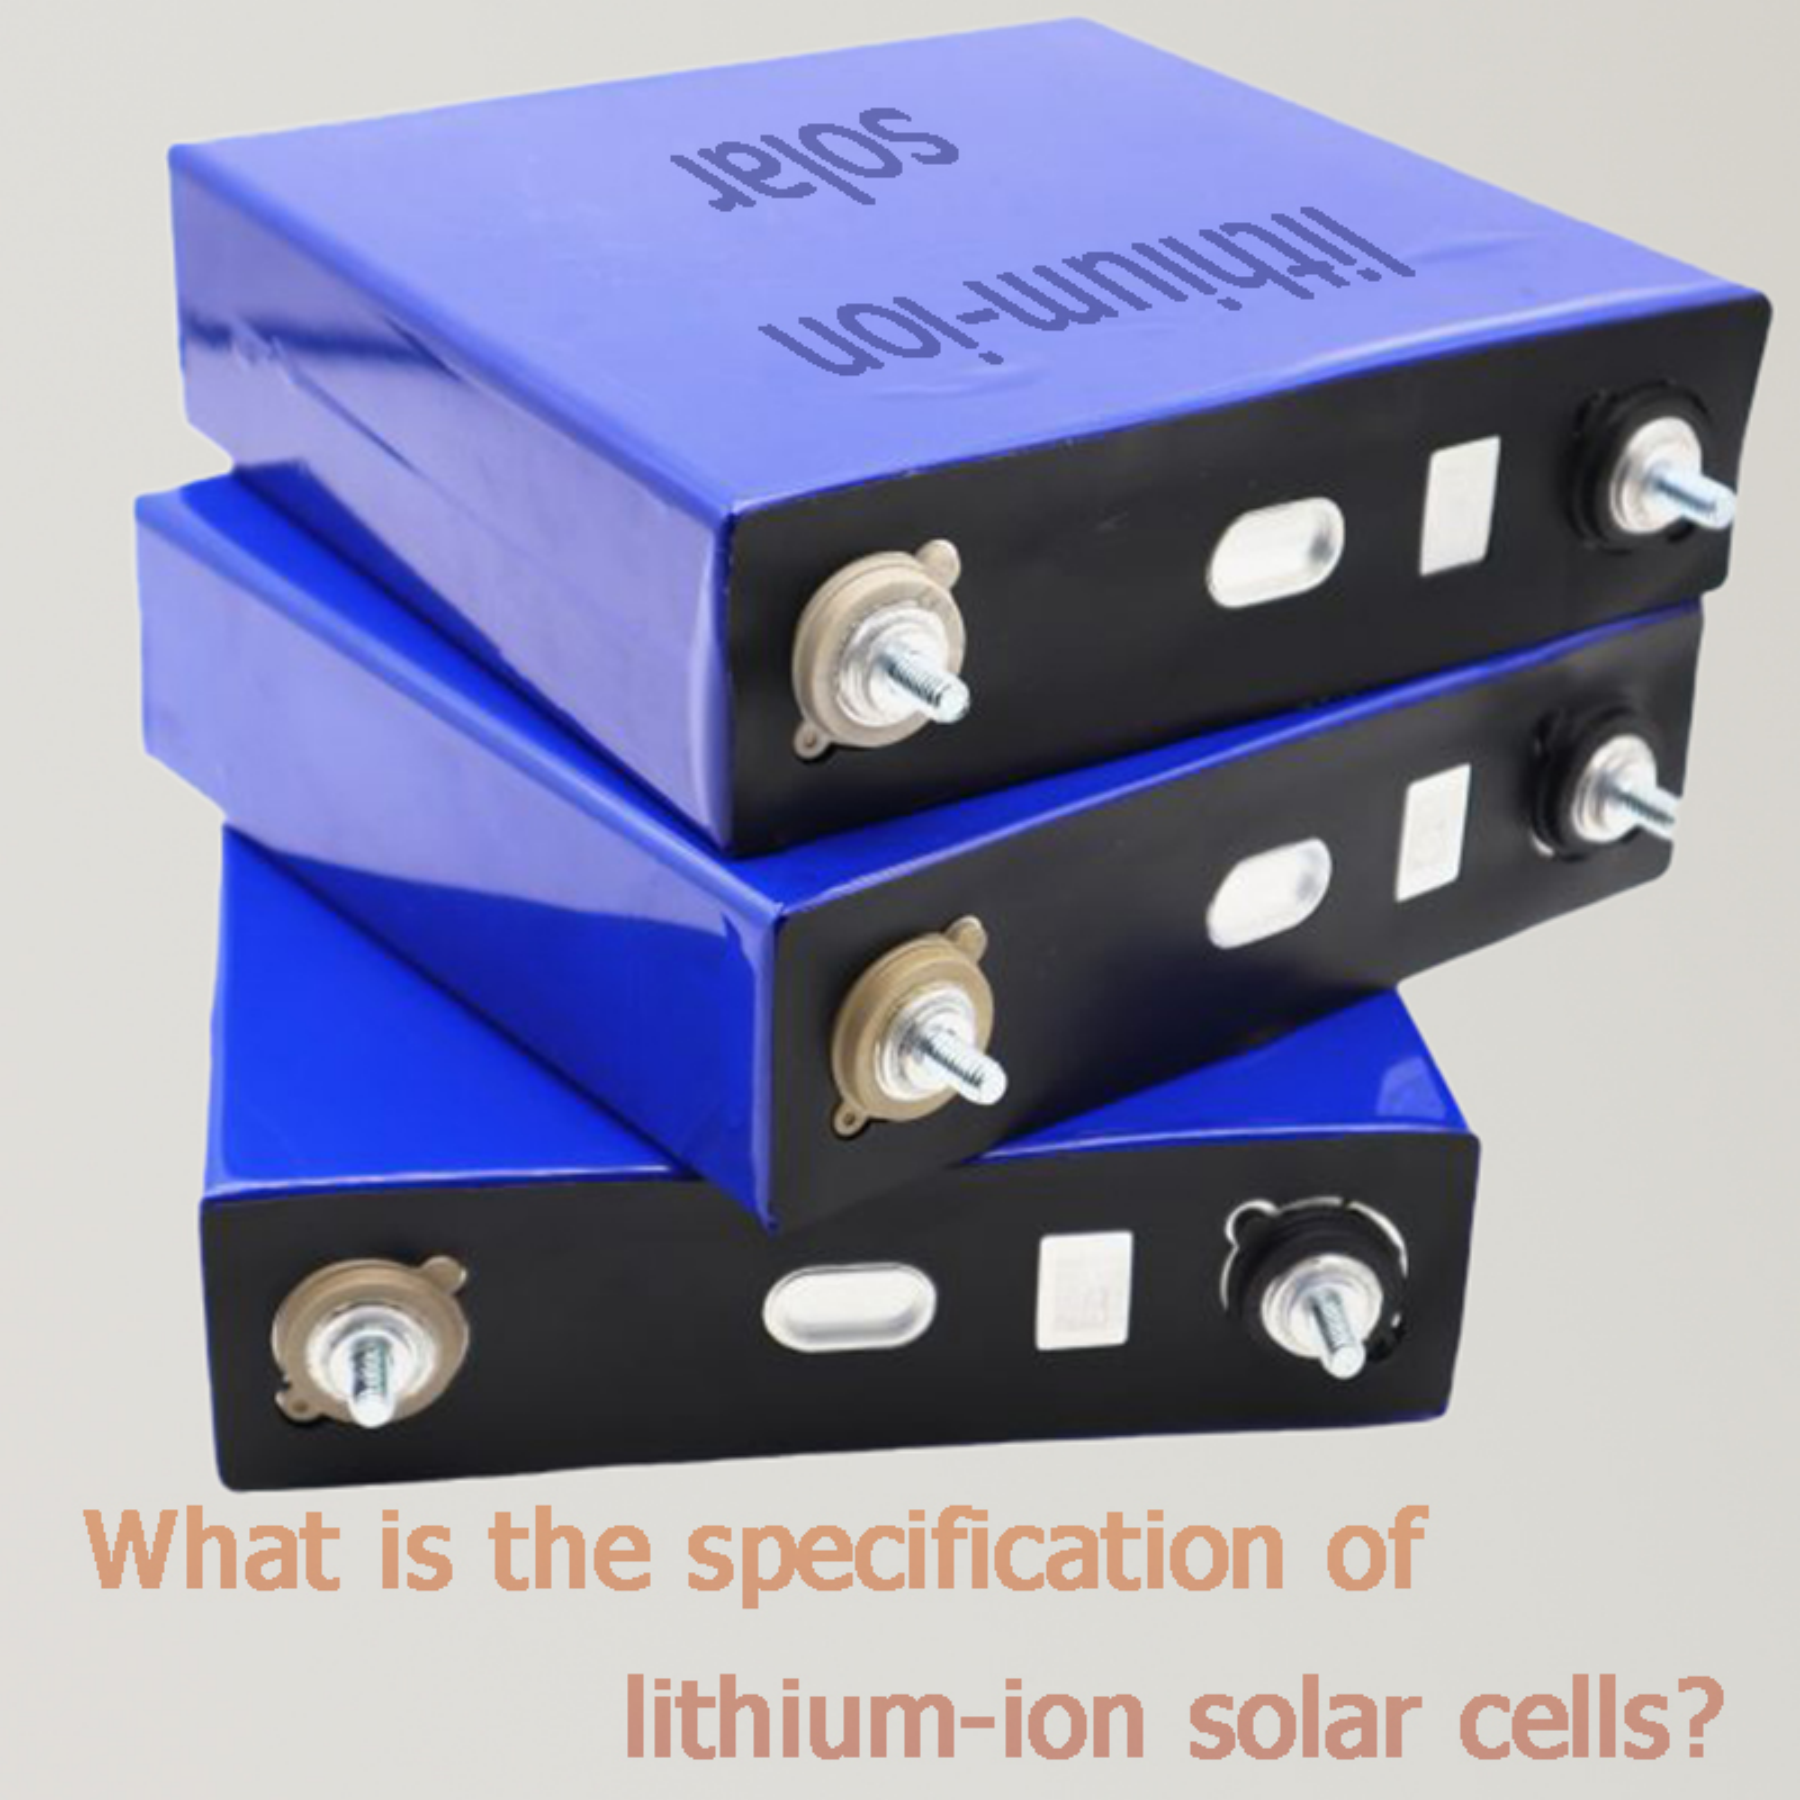 What is the specification of lithium-ion solar cells